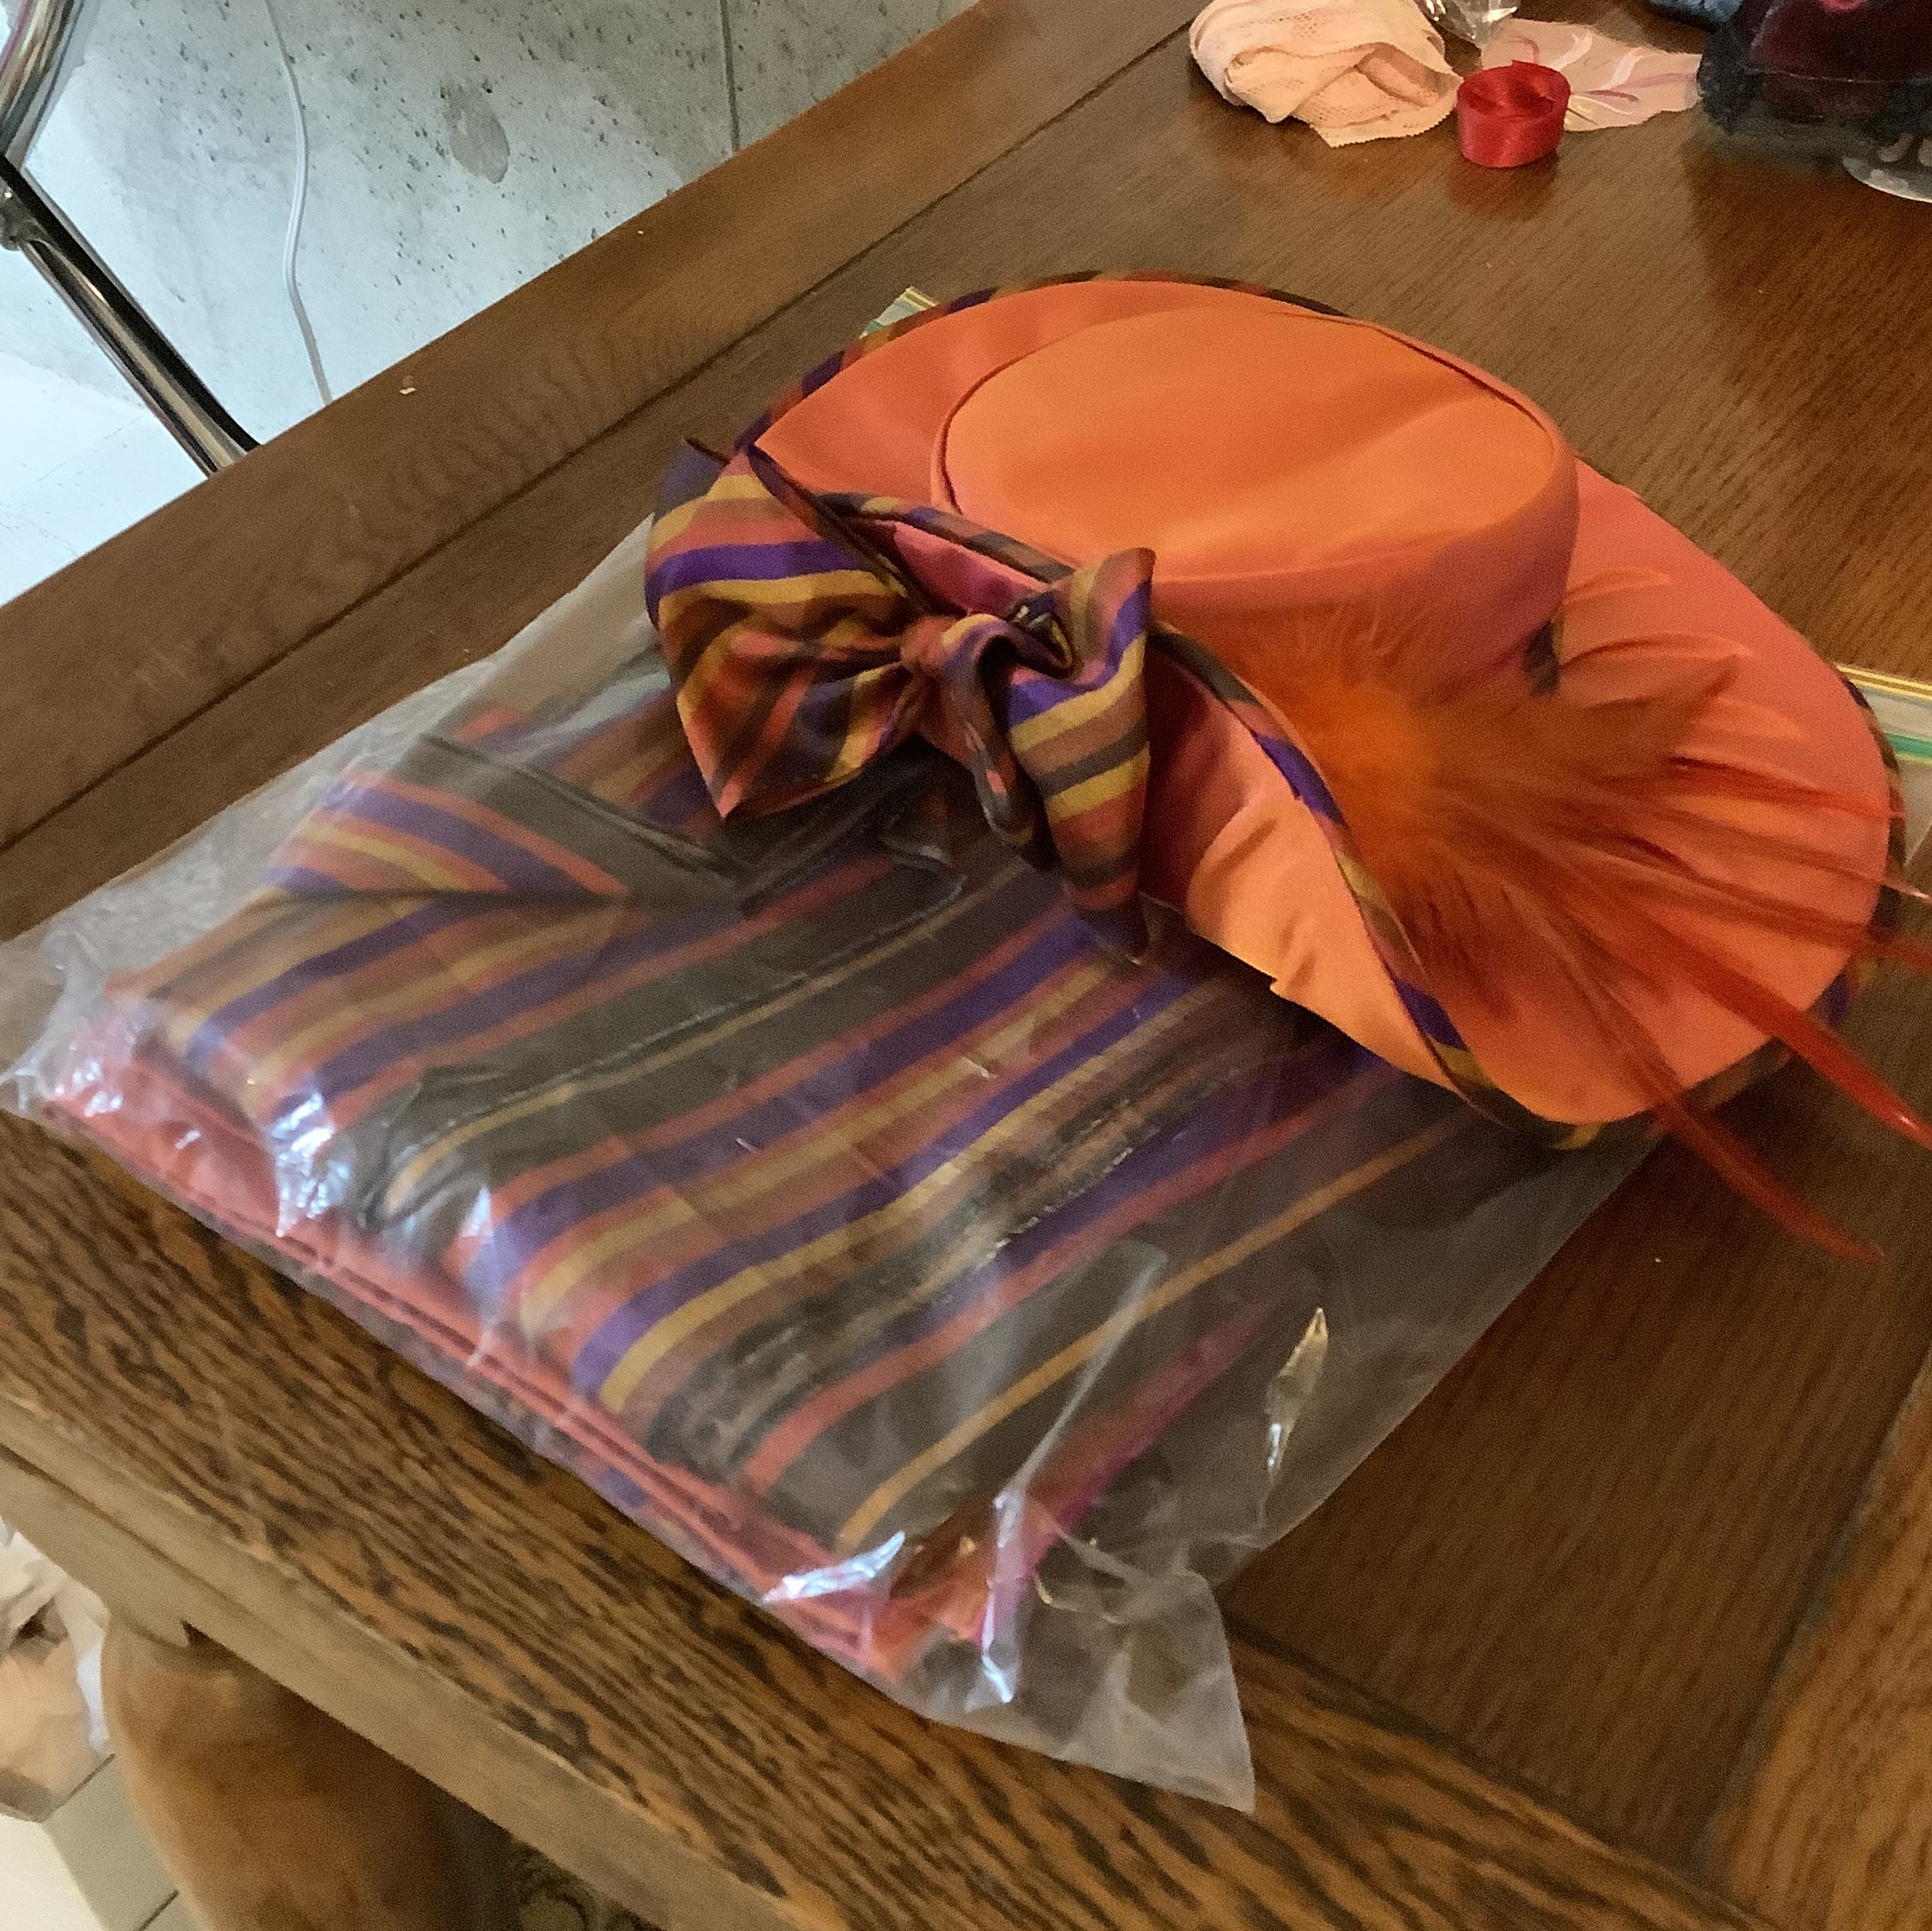 plastic bag containing striped orange and purple fabric, under a hat made from the same fabric with a bow and an orange feather